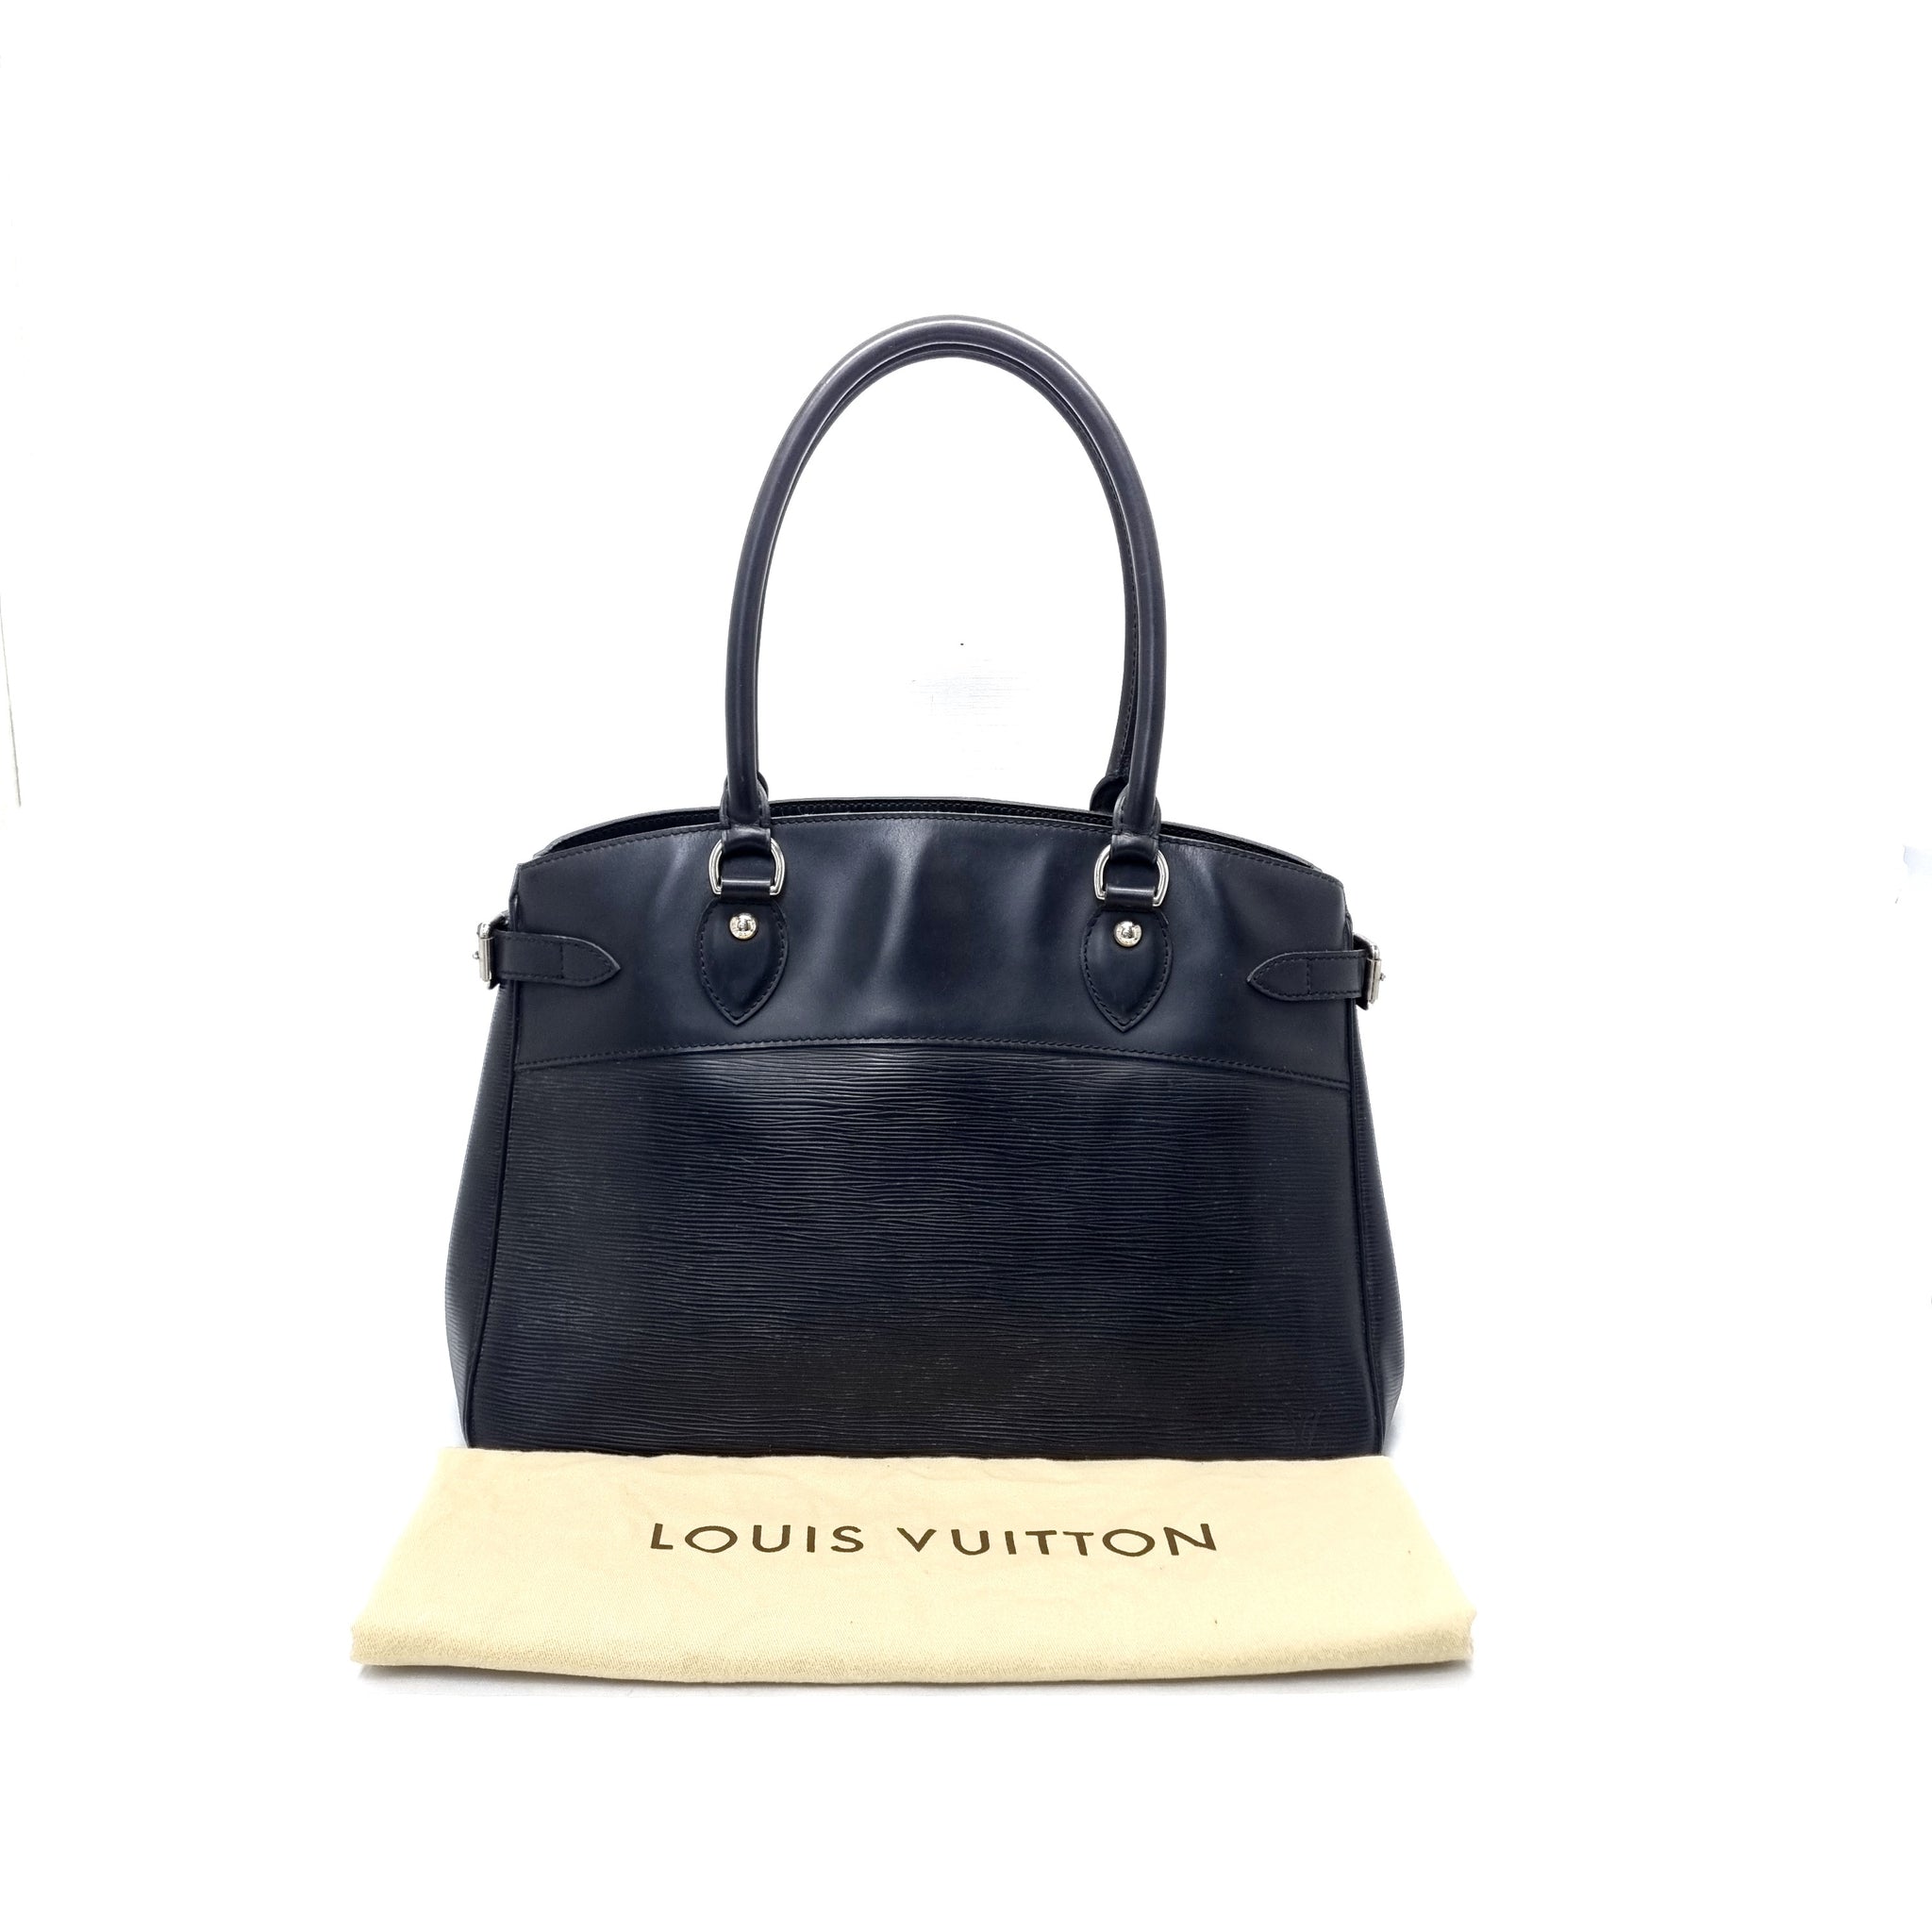 Louis Vuitton Epi Passy Pm Leather Handbag (pre-owned) in Black